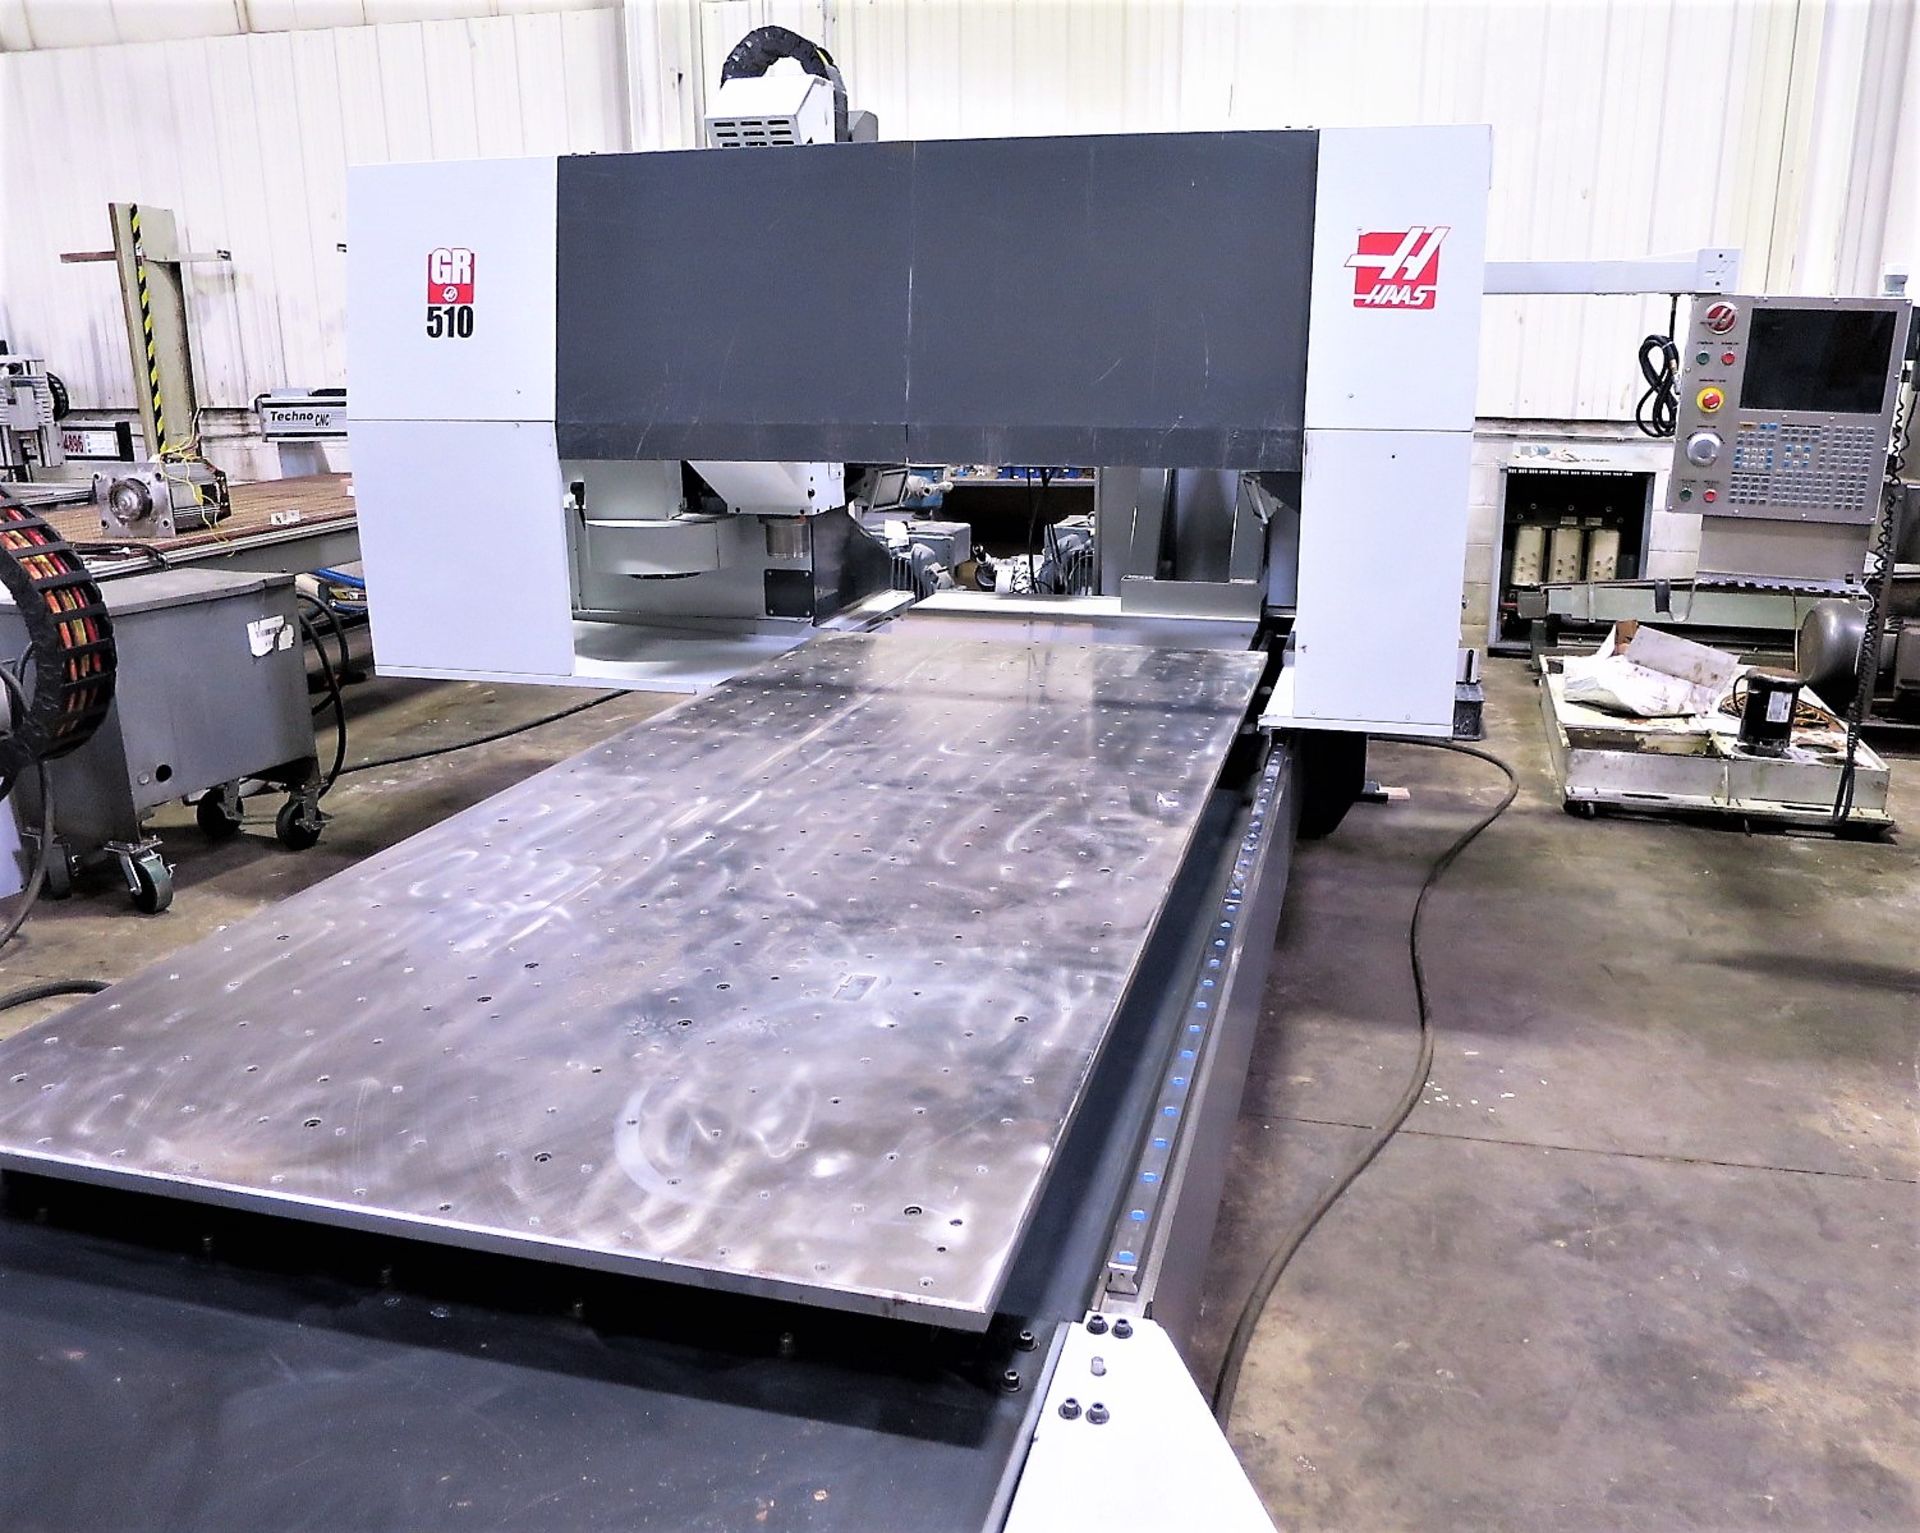 5'X10' Haas Model GR510 3-Axis CNC Router Vertical, S/N 1115694, New 20014